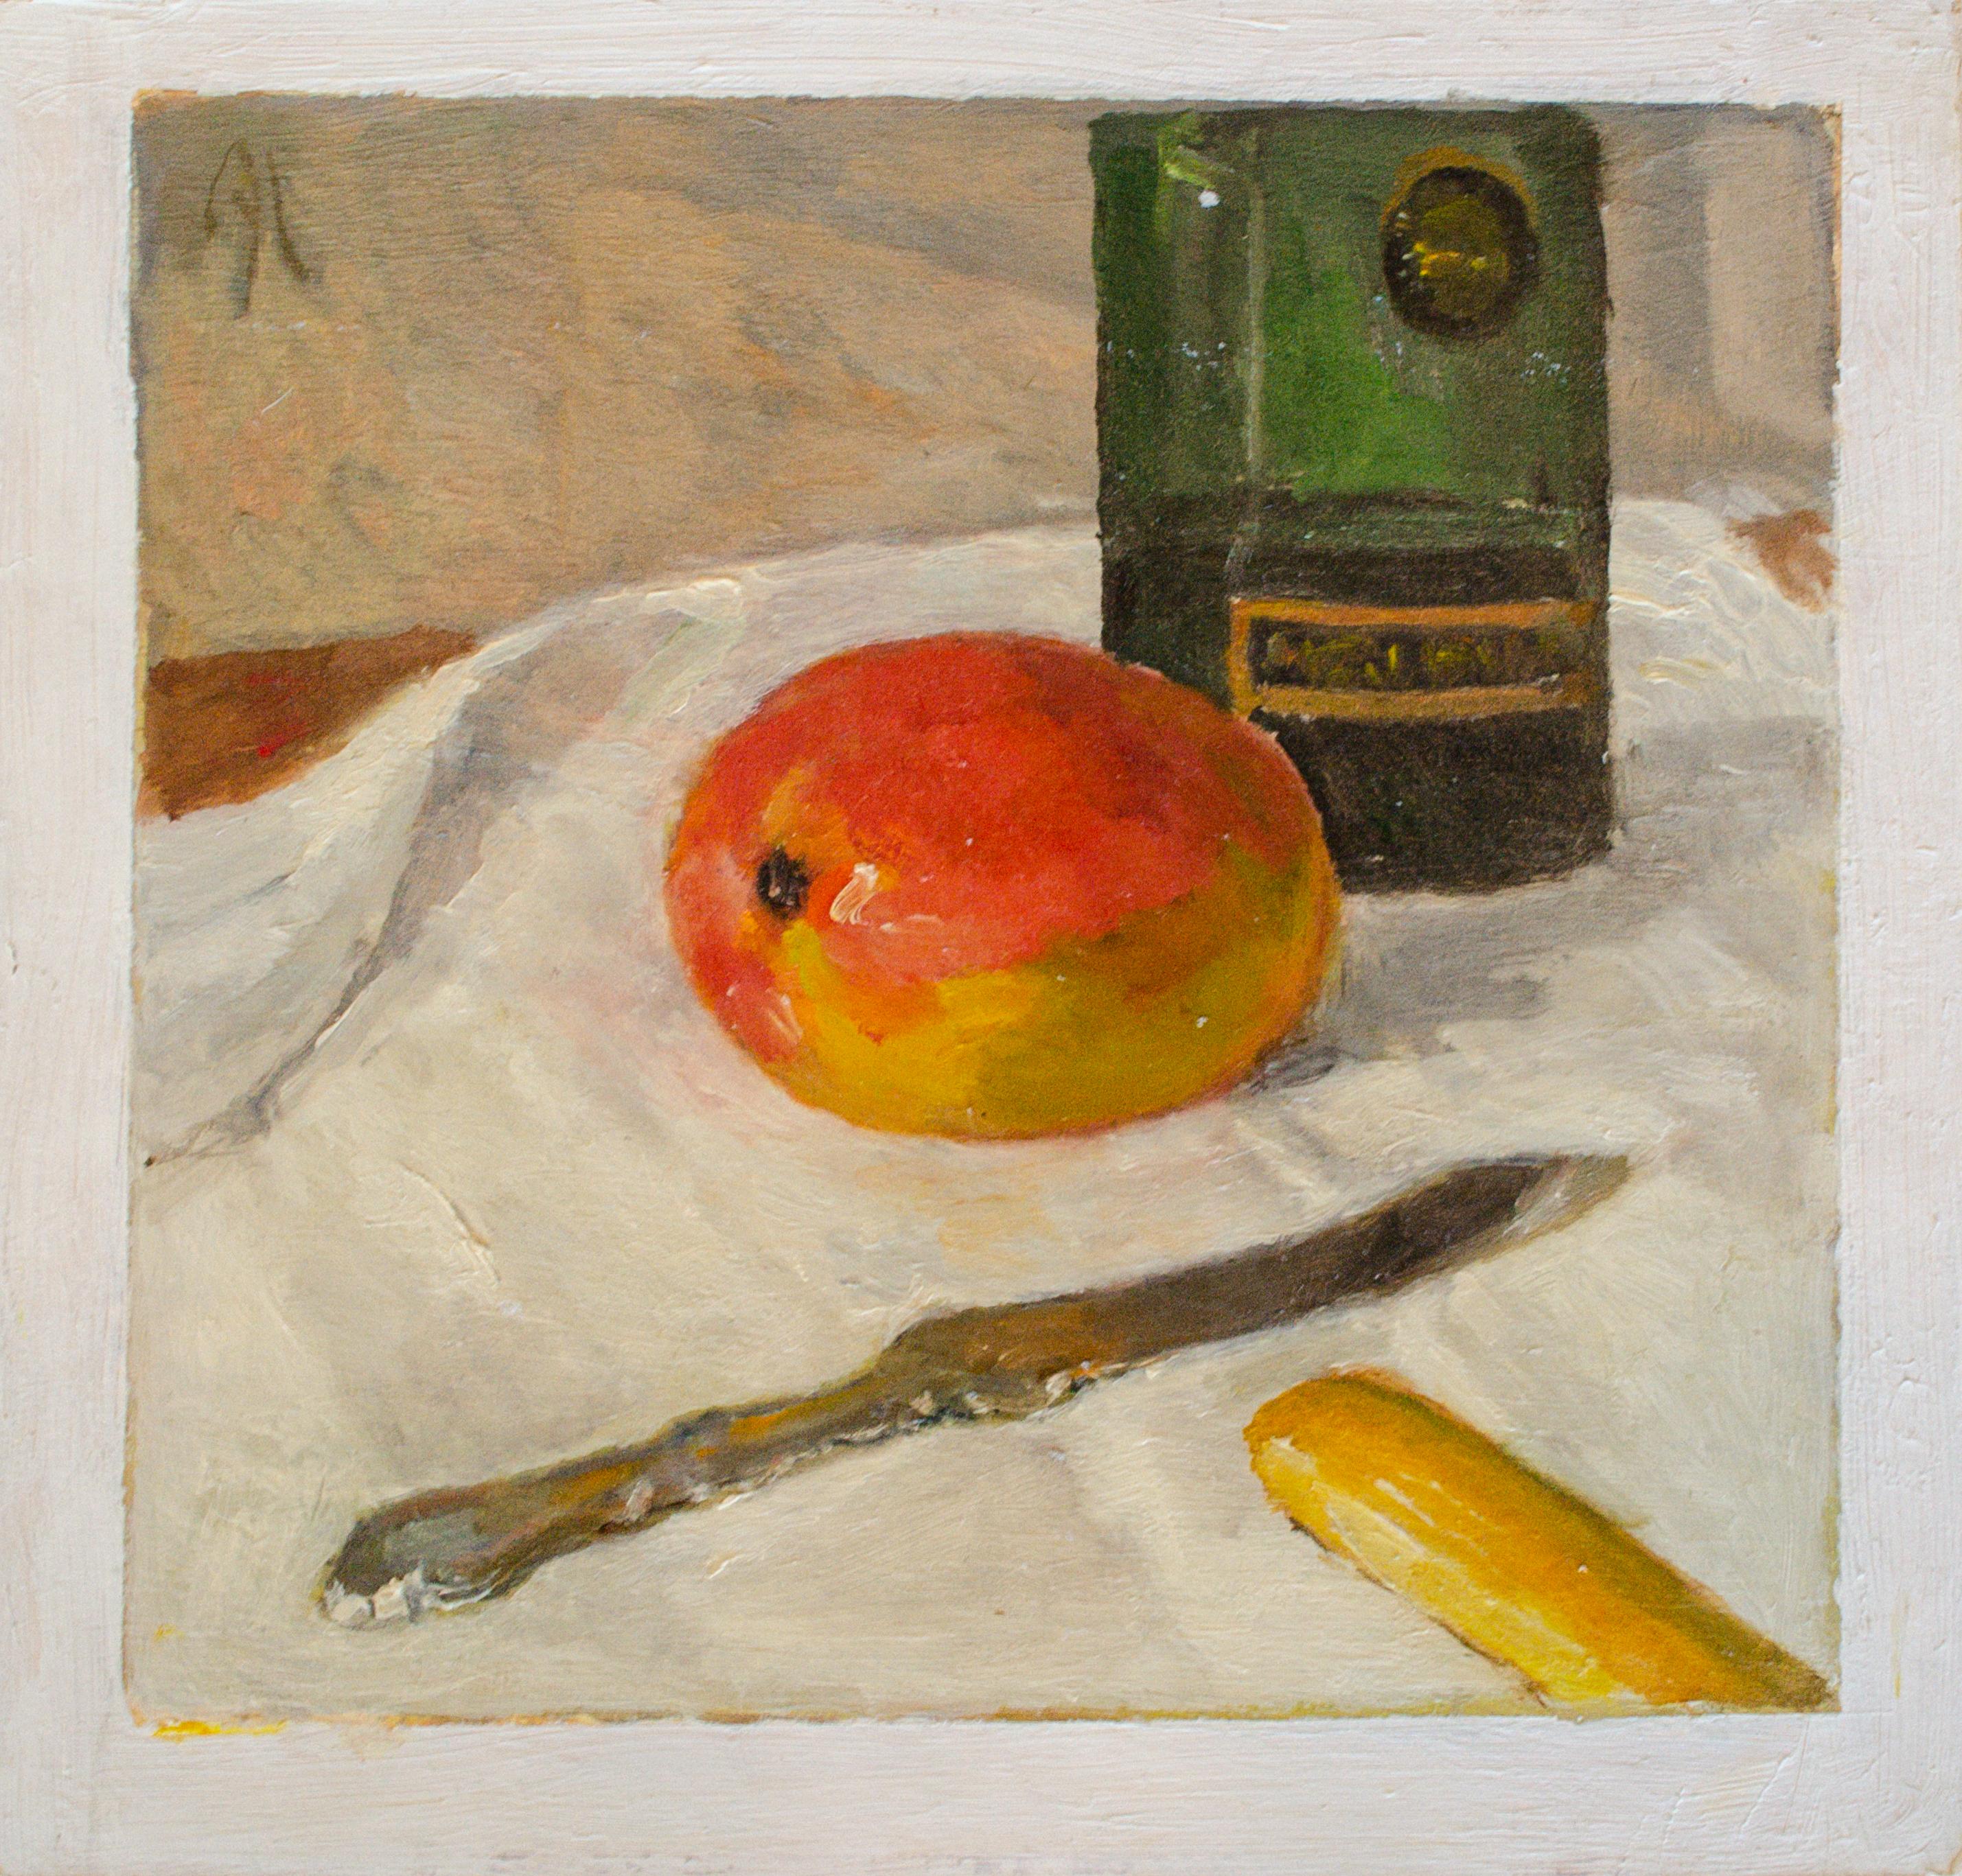 Abram Lerner (founding director of Hirshorn Museum, 1917-2009)
Still Life with Mango, 1999
Oil on wood panel
10 x 10 1/3 in.
Signed and inscribed verso: Abram Lerner, Still Life with Mango, To Naomi and Walter con affezione, 3/99, Southampton